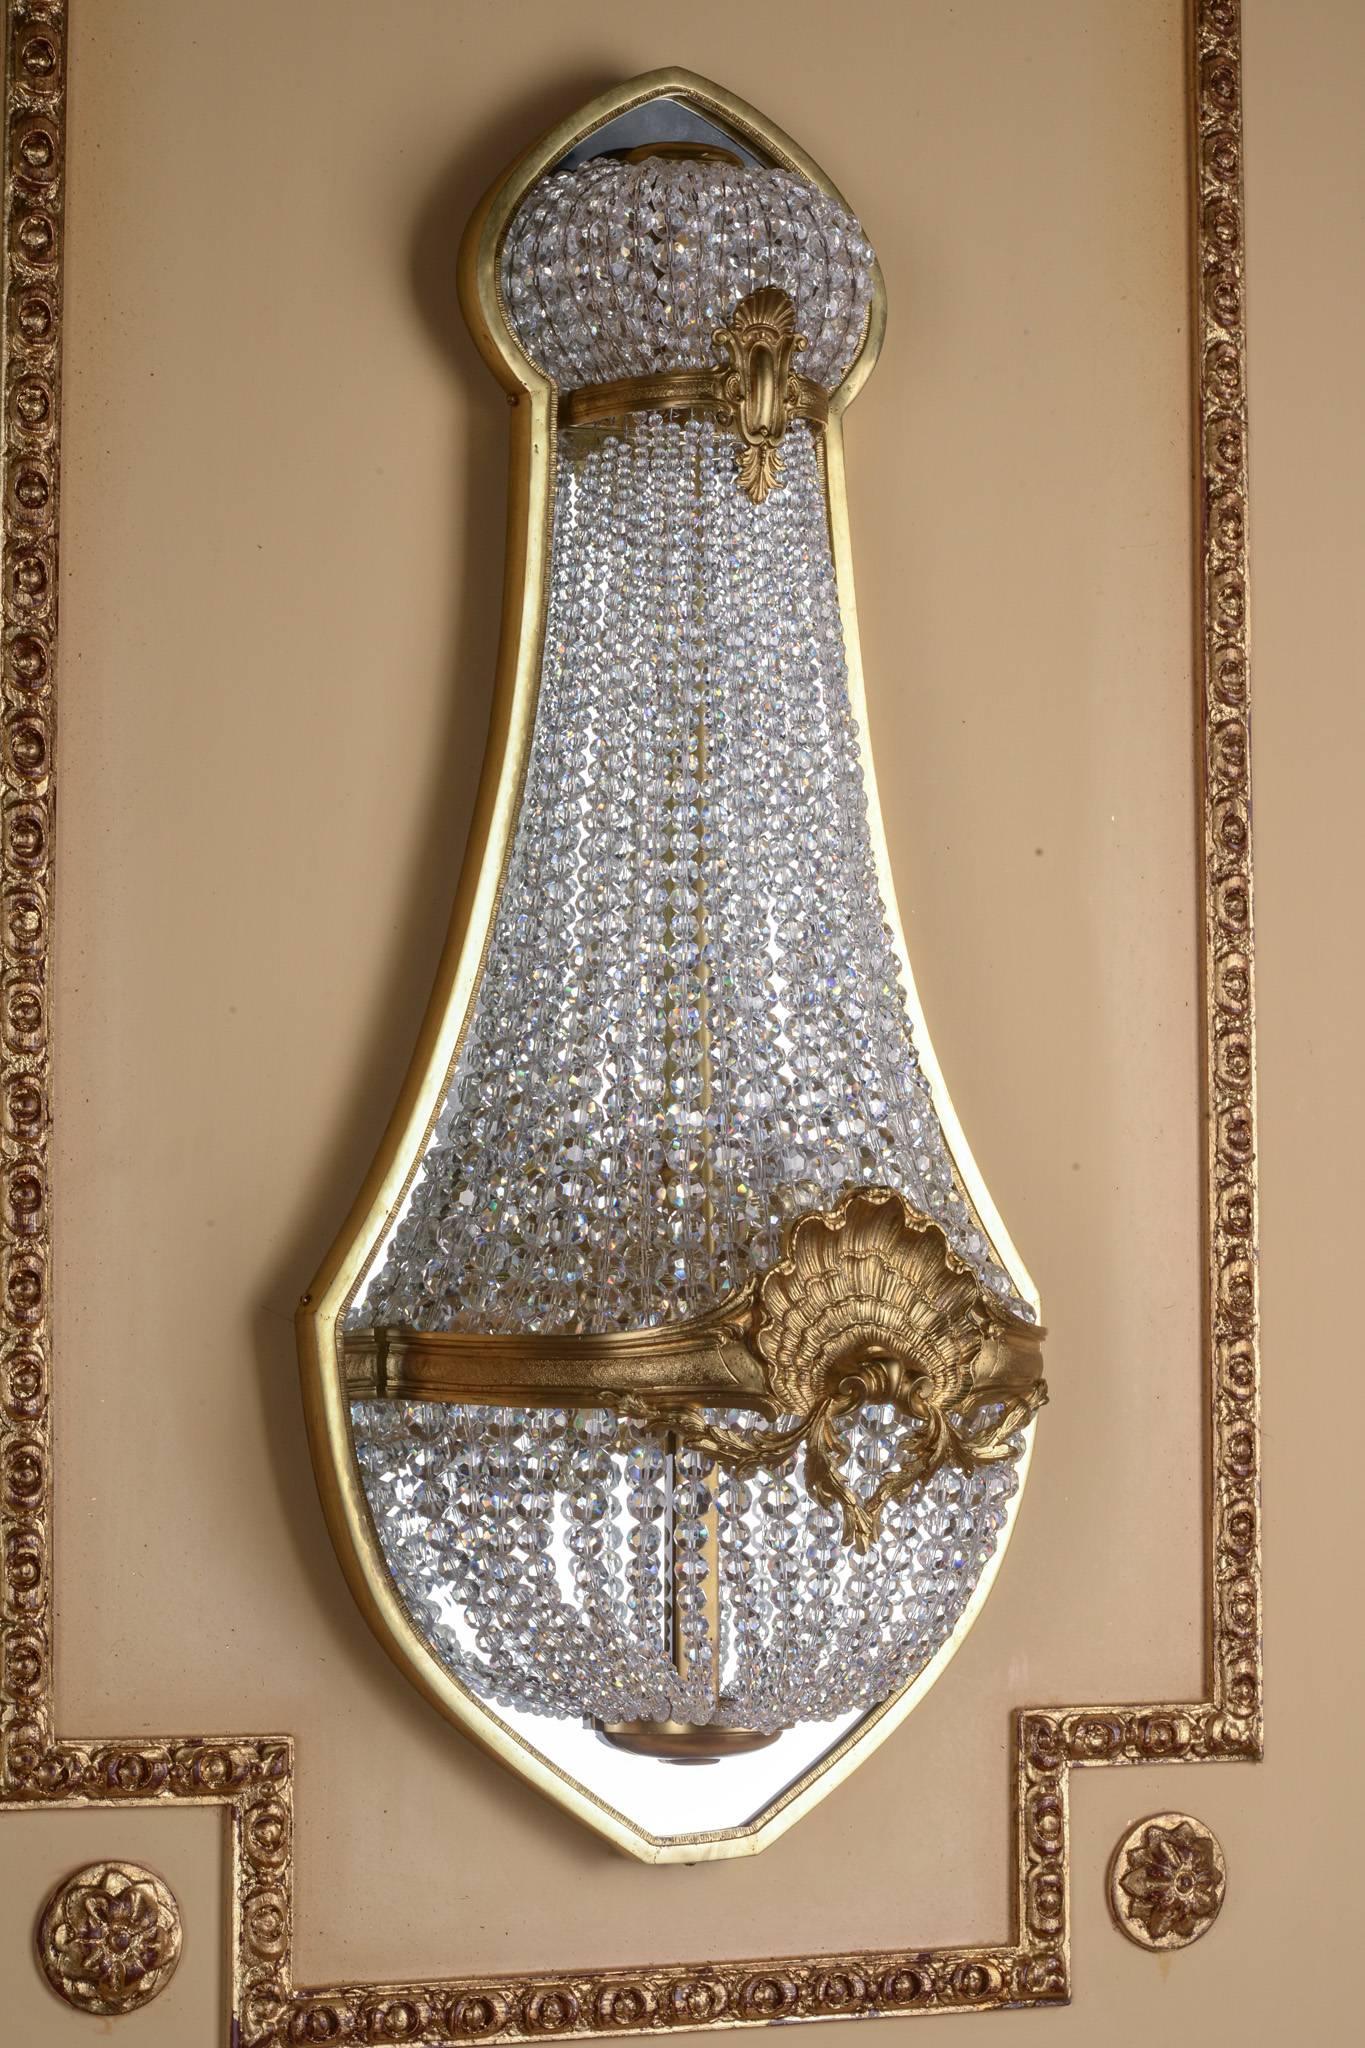 A classicist wall sconce with finely chiselled bronze. Basket-shaped body made of handcut French ball prisms in the course of broad, ornamental-reliefed ring connected centrally placed shell. The finely ground crystals break and reflect the light